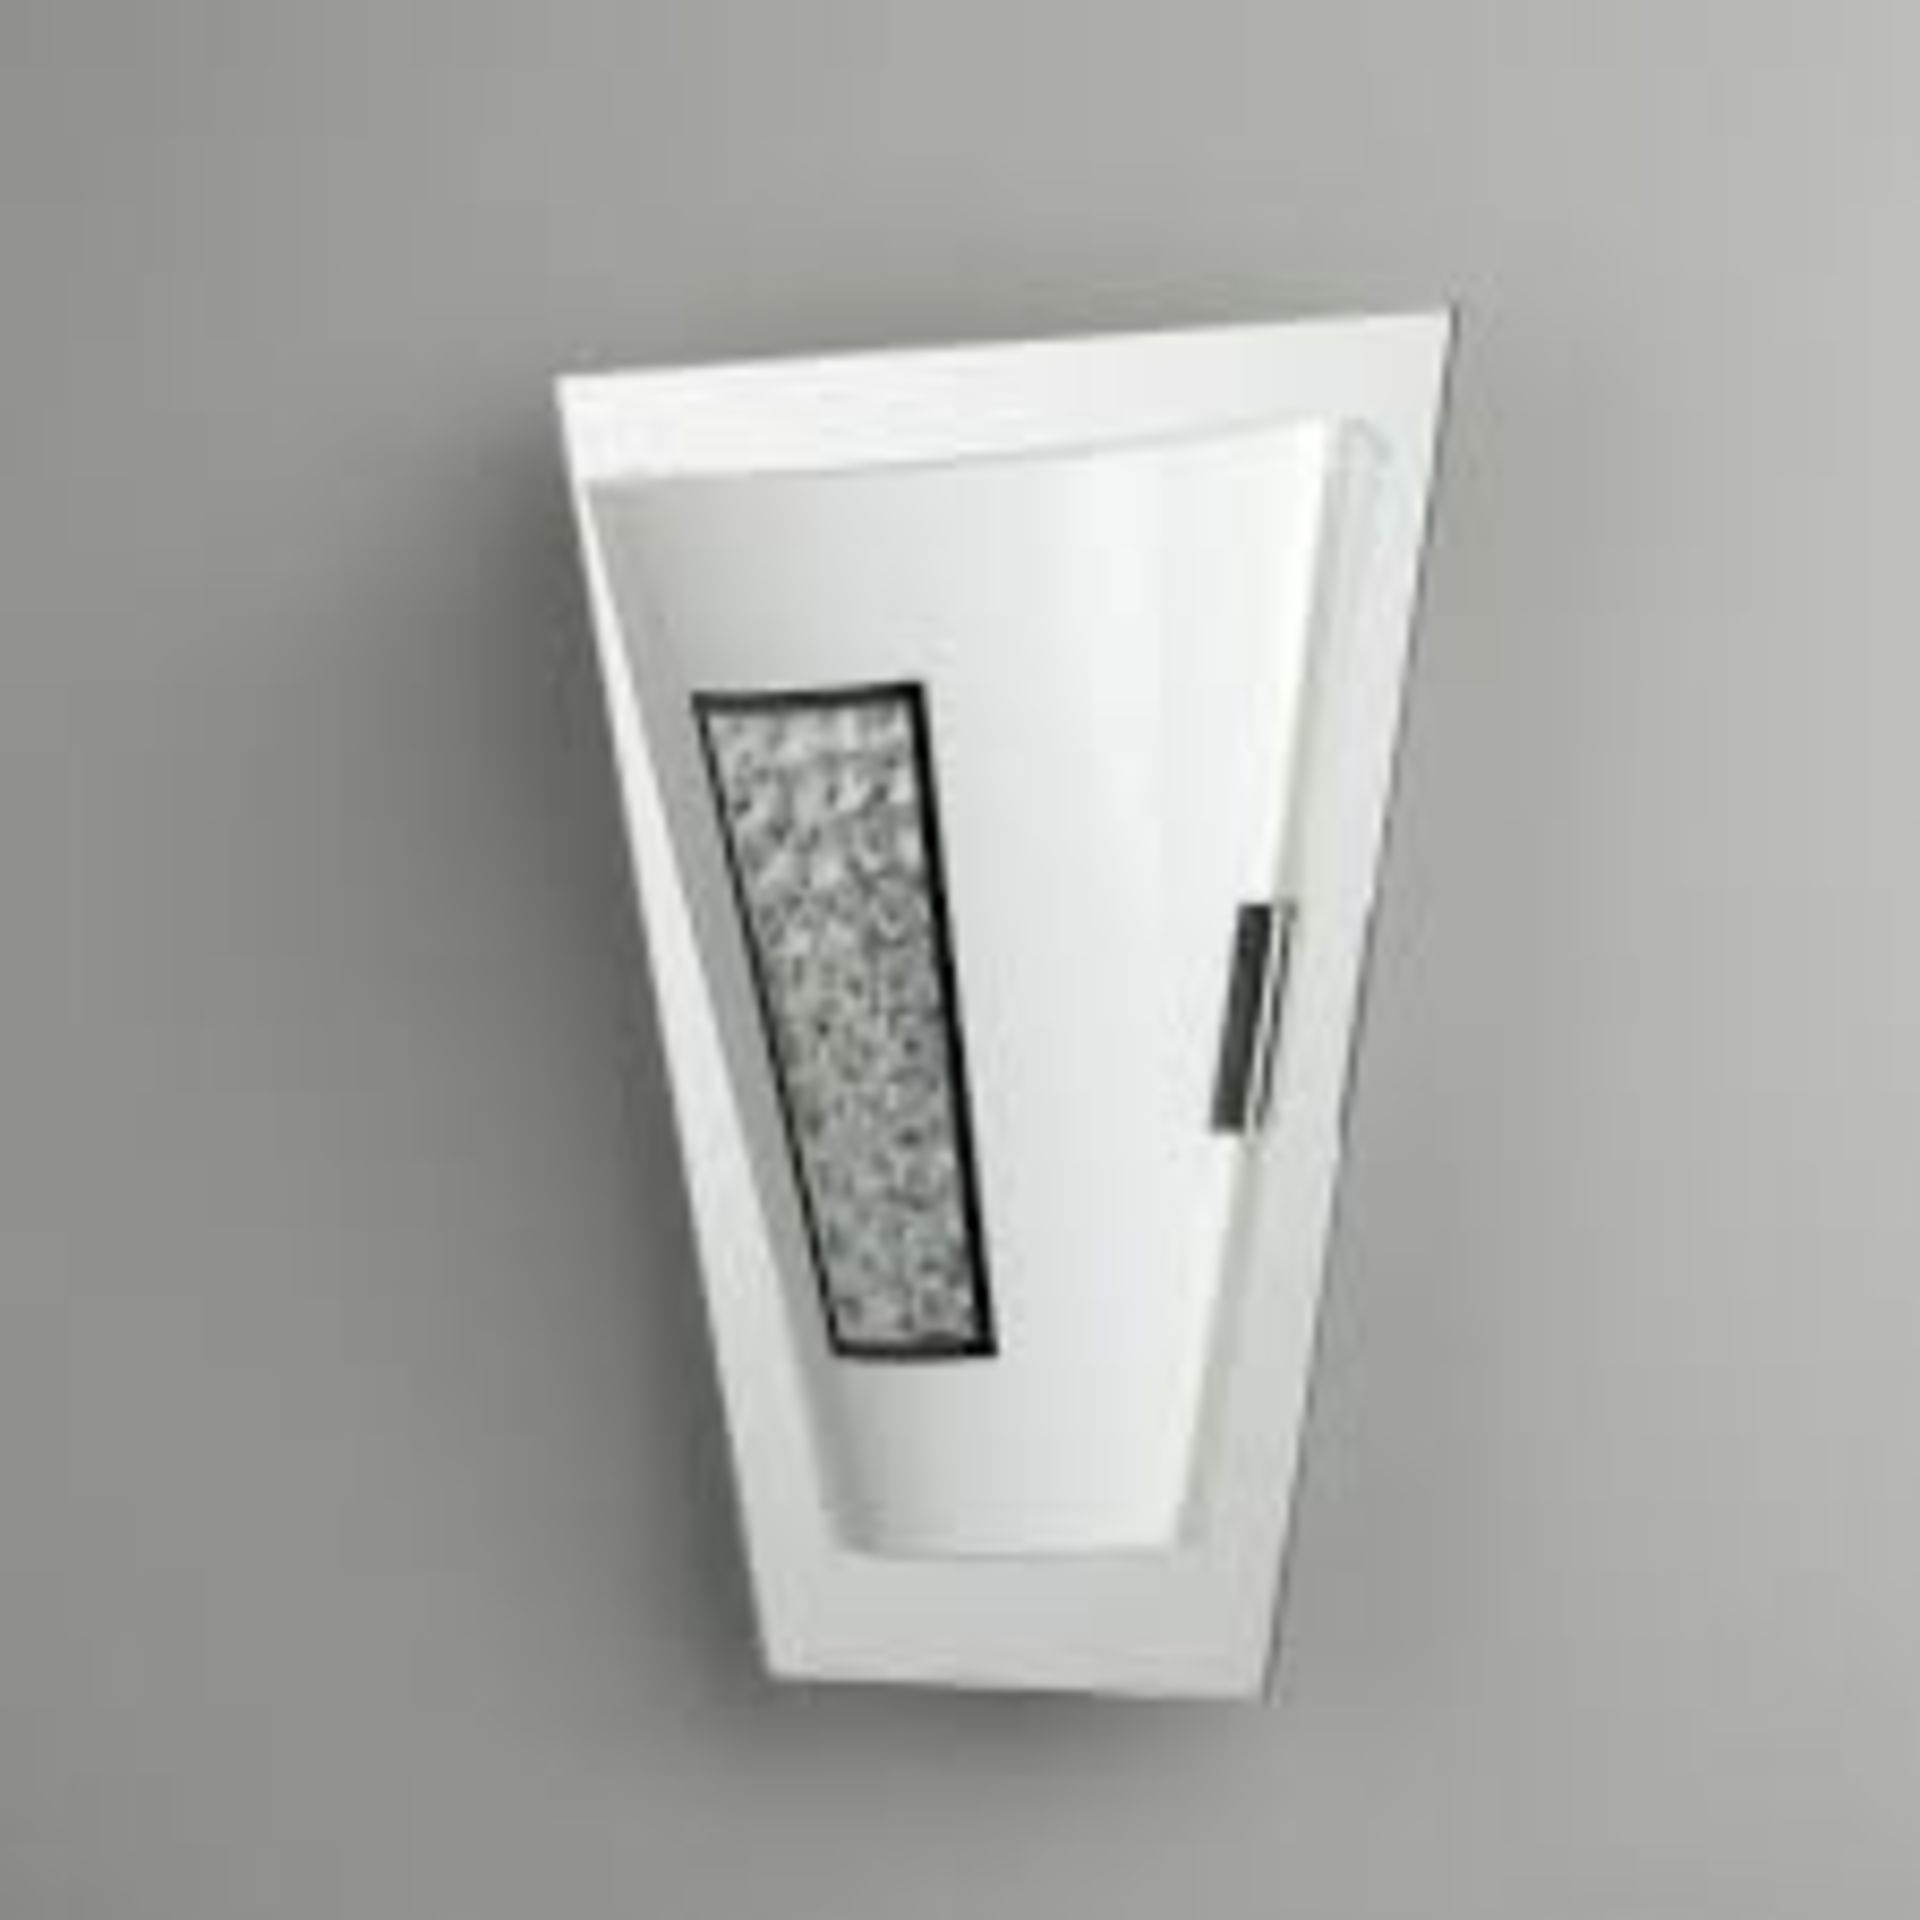 1 x Searchlight Chrome LED wall light with white glass - Ref: 3773-IP - New and Boxed - RRP: £110.40 - Image 3 of 4